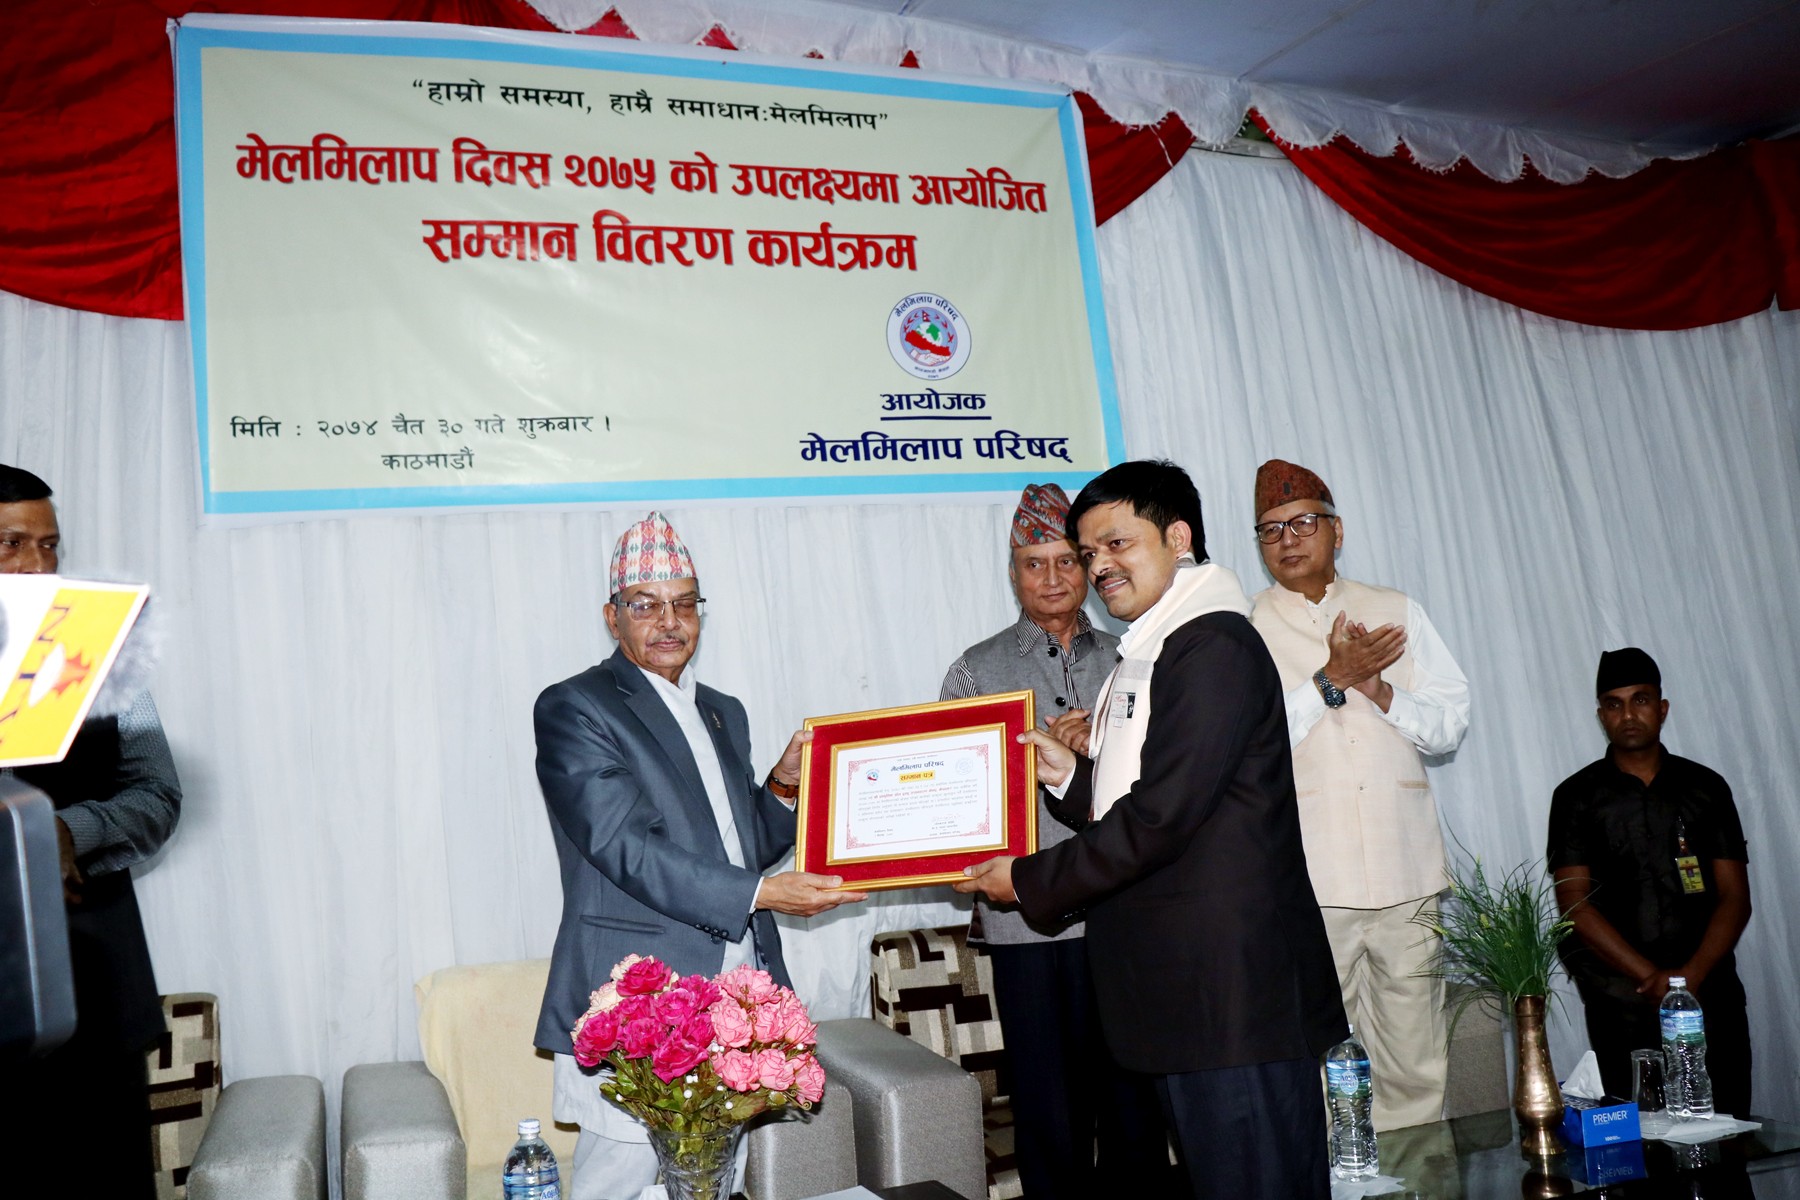 Mediation Council of Nepal felicitated NRCTC as the best organization working in peacebuilding sector of Nepal.